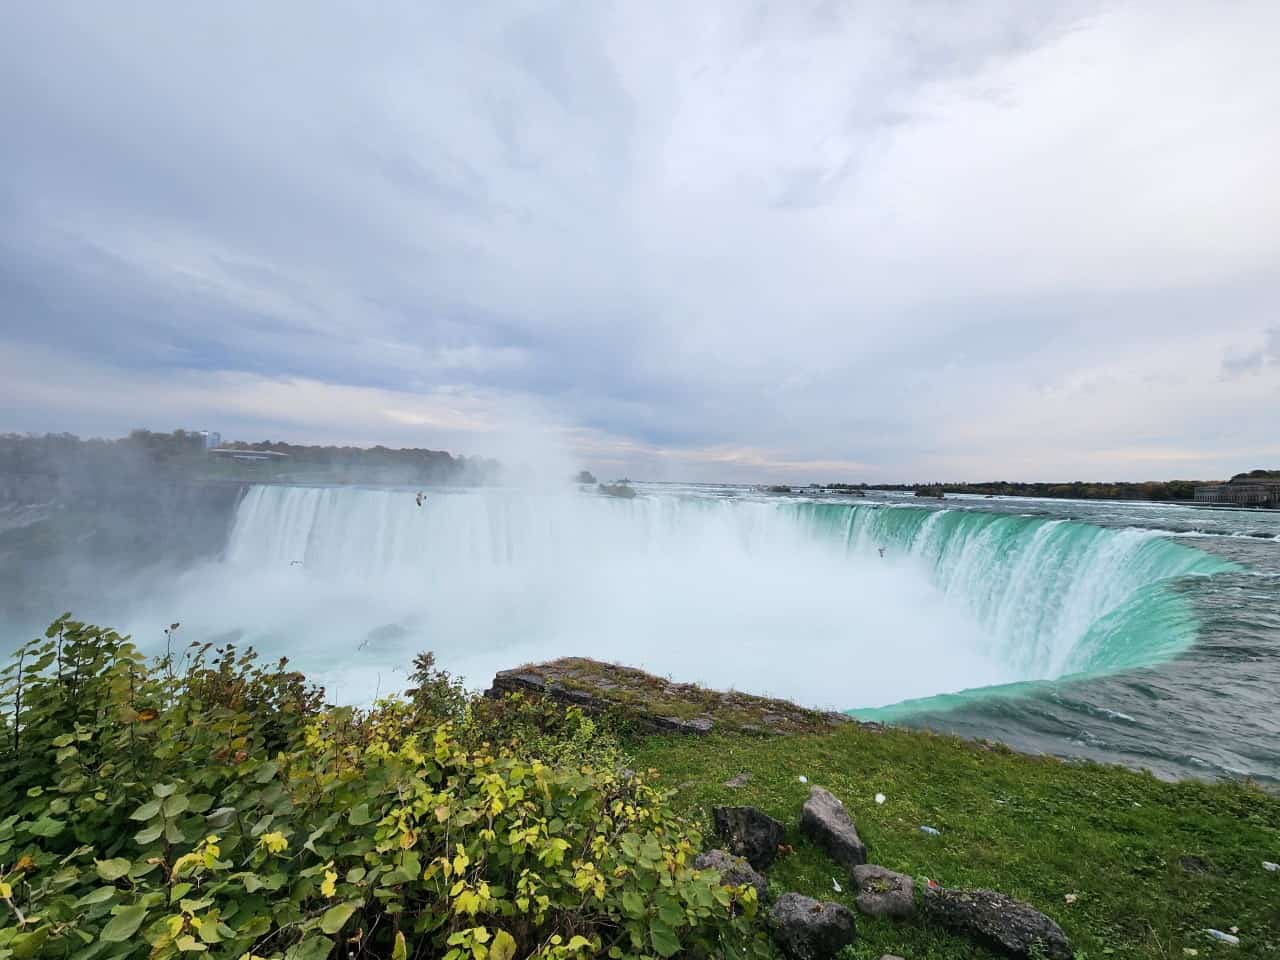 Niagara Falls is a Canadian Attraction  - Seeing as you can see Niagara Falls from your vehicle, it's definitely a roadside attraction so had to make this list of fun attractions in Canada. 